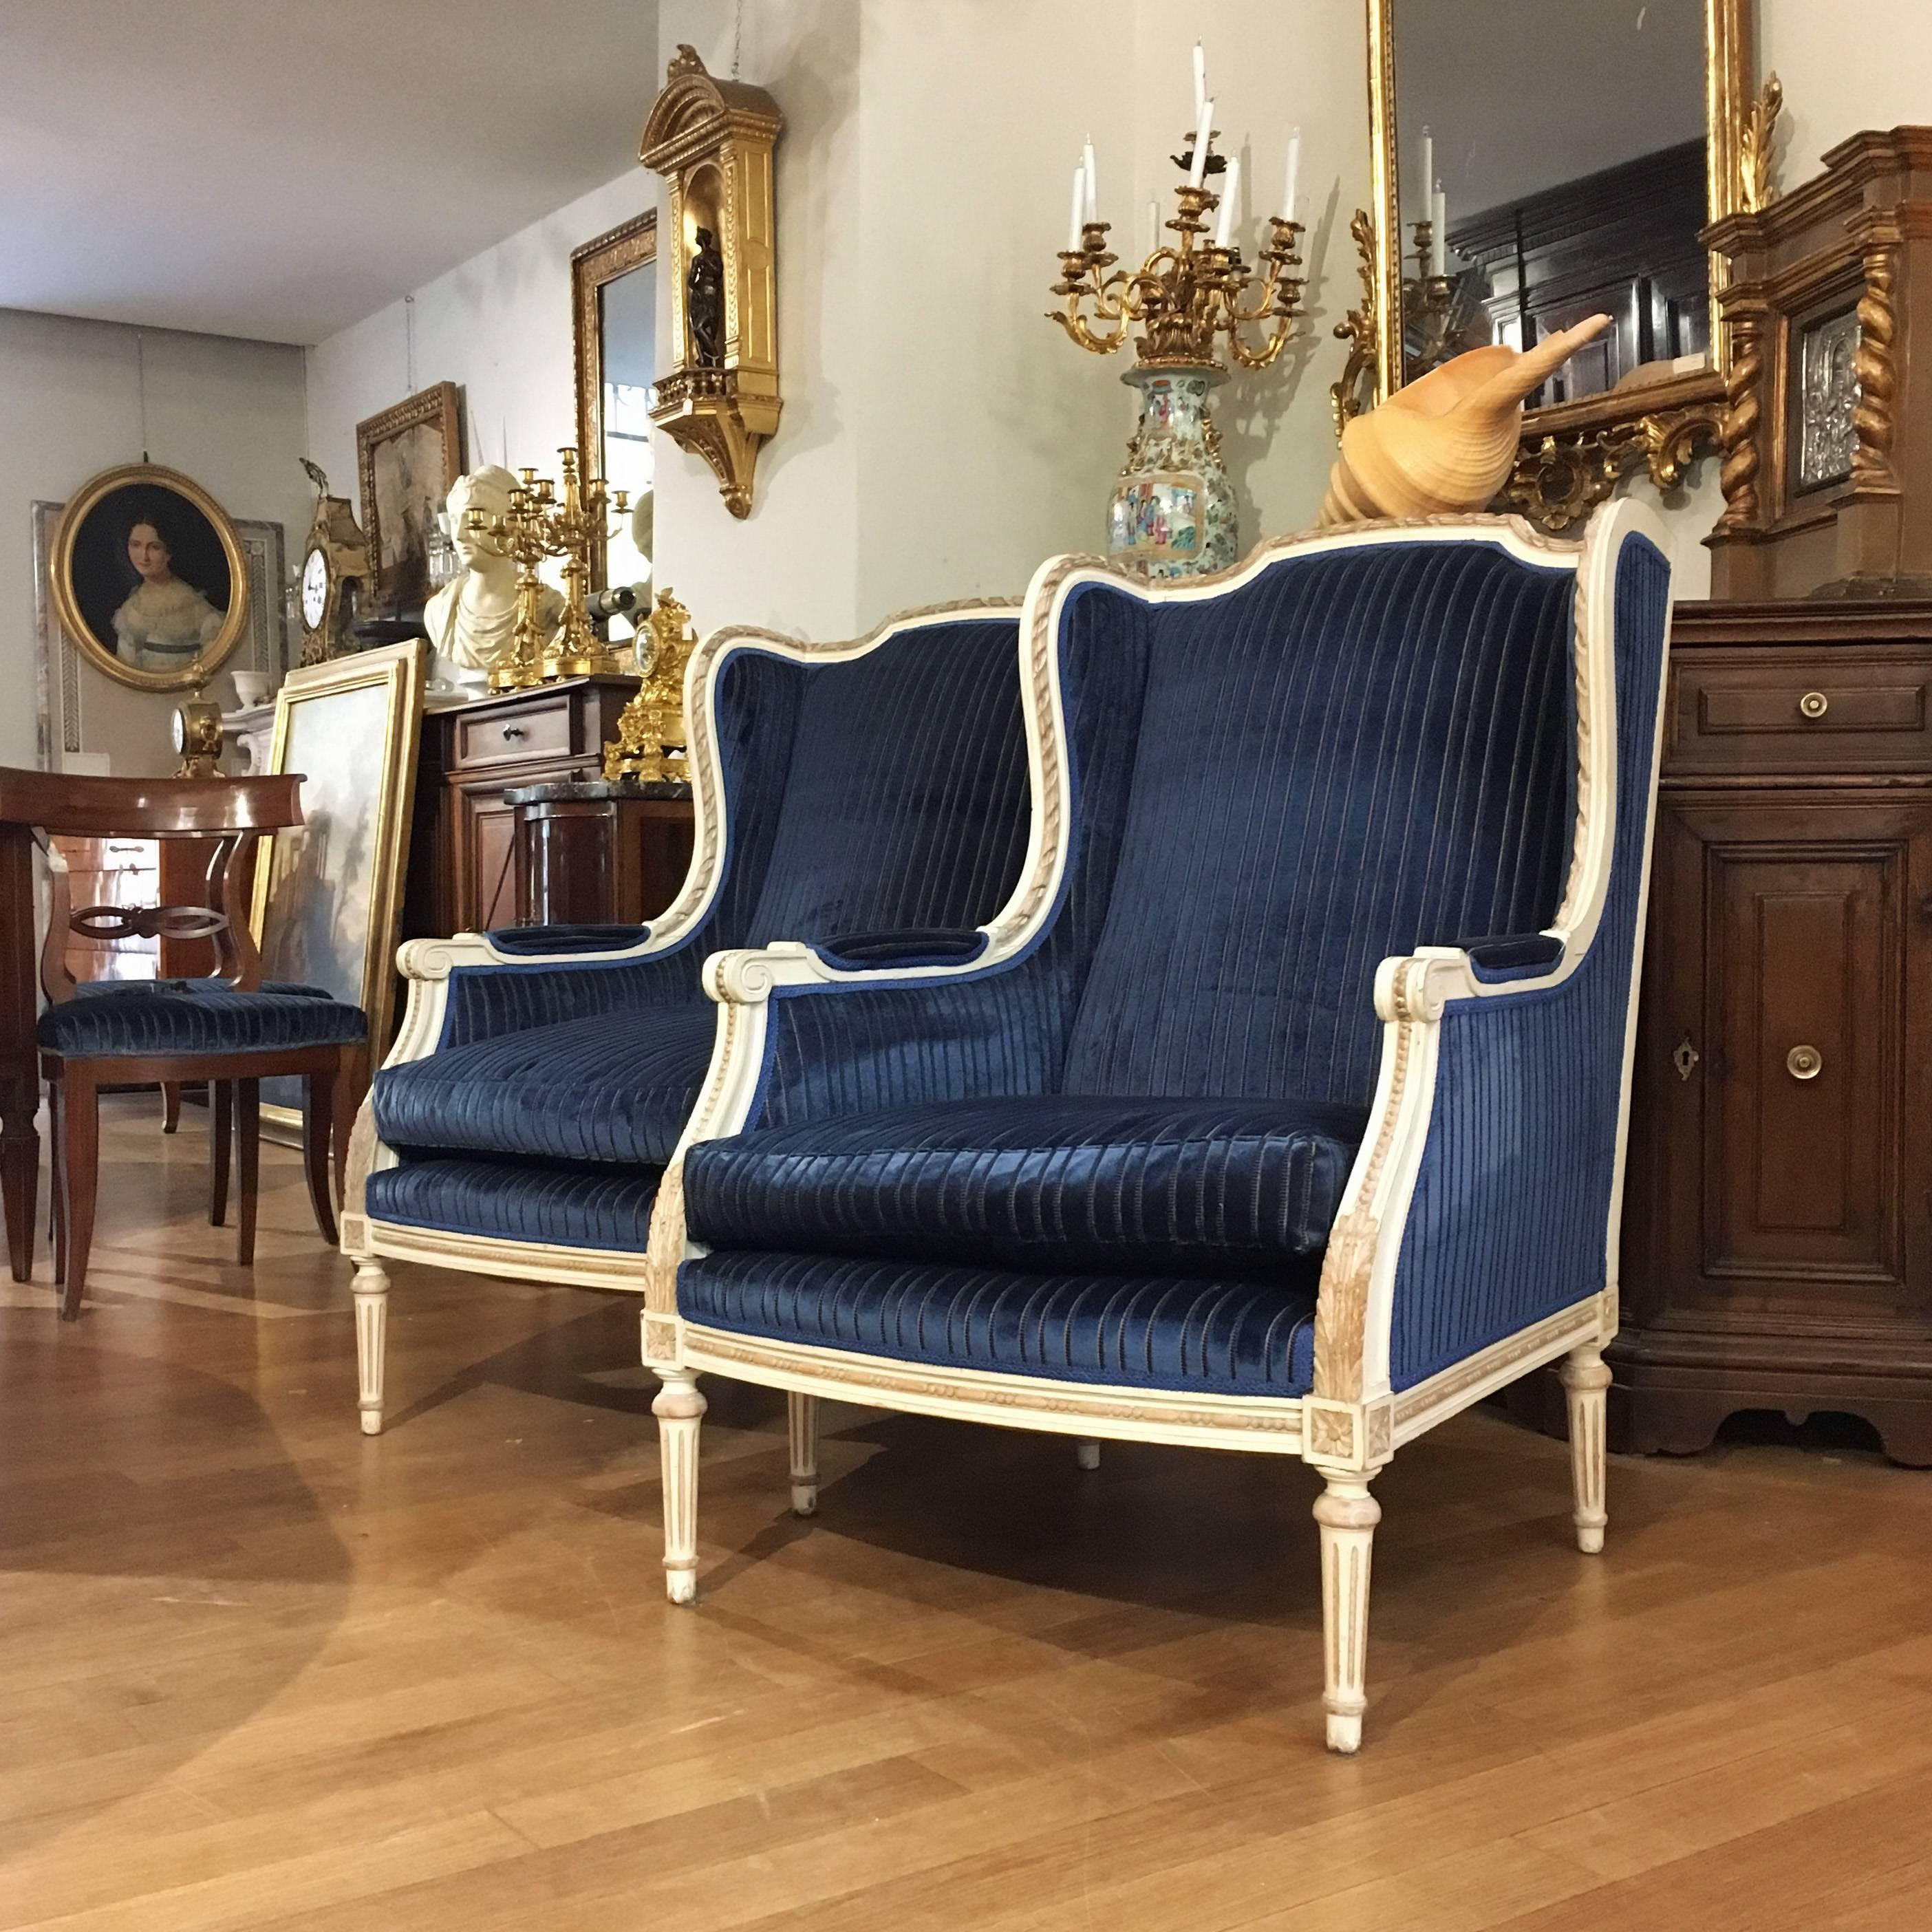 Mid-19th Century Italian Louis XVI Style Painted Polpar Wood Wing Chairs For Sale 5